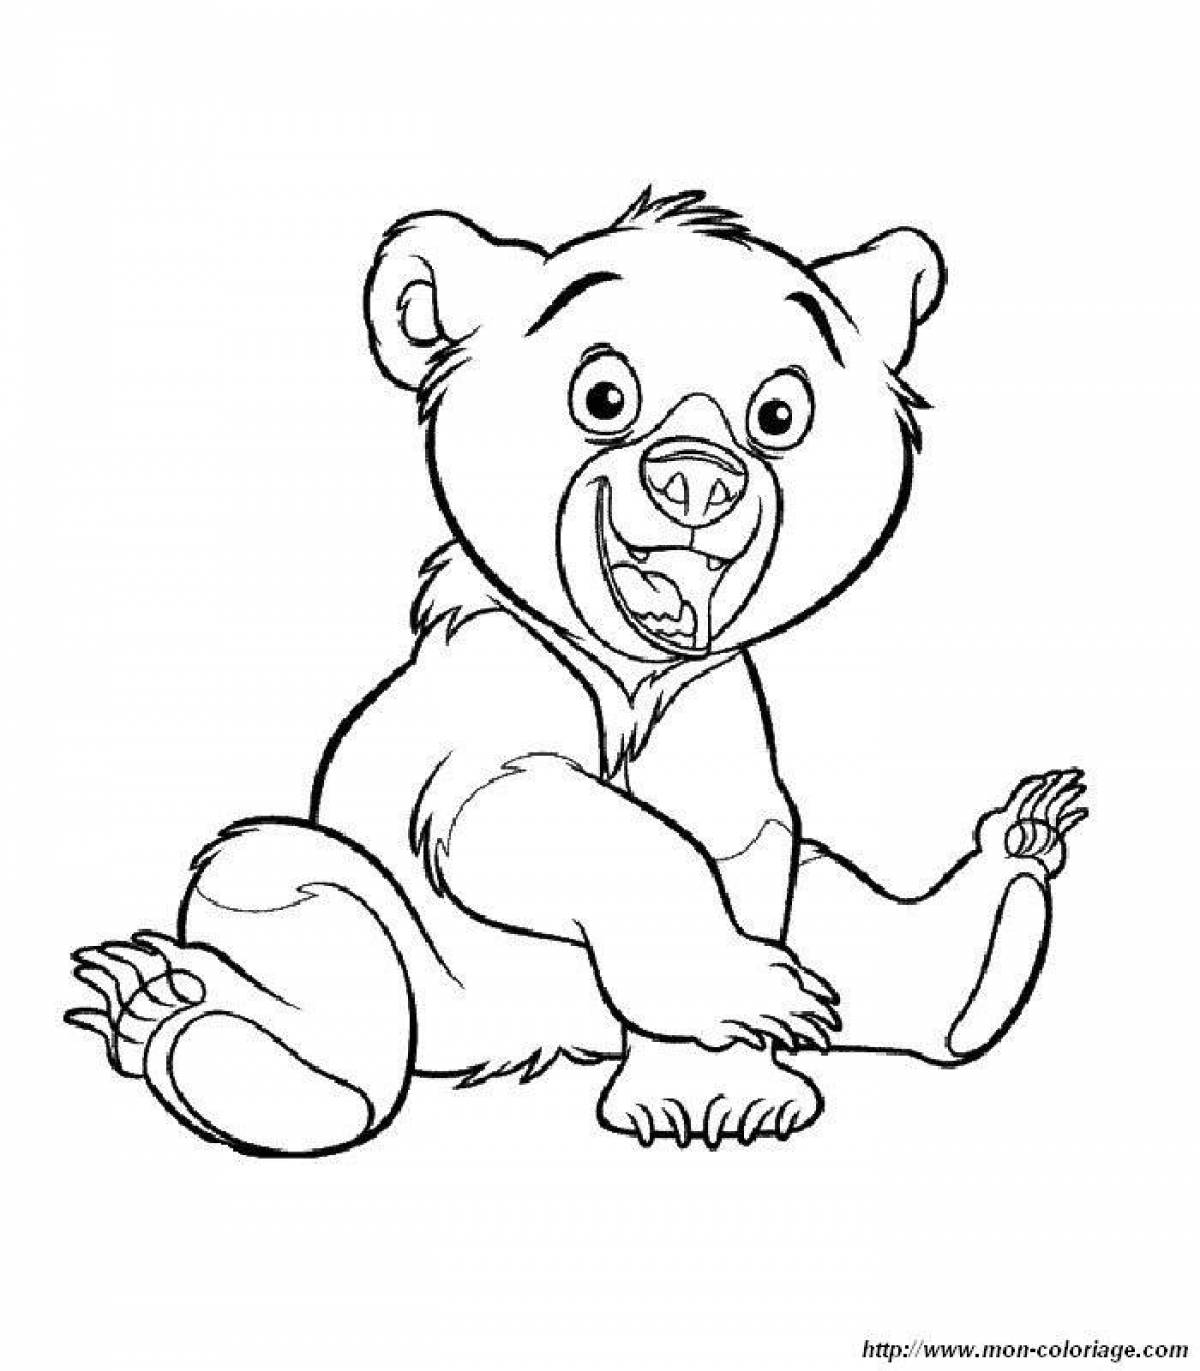 Coloring book funny bear for kids